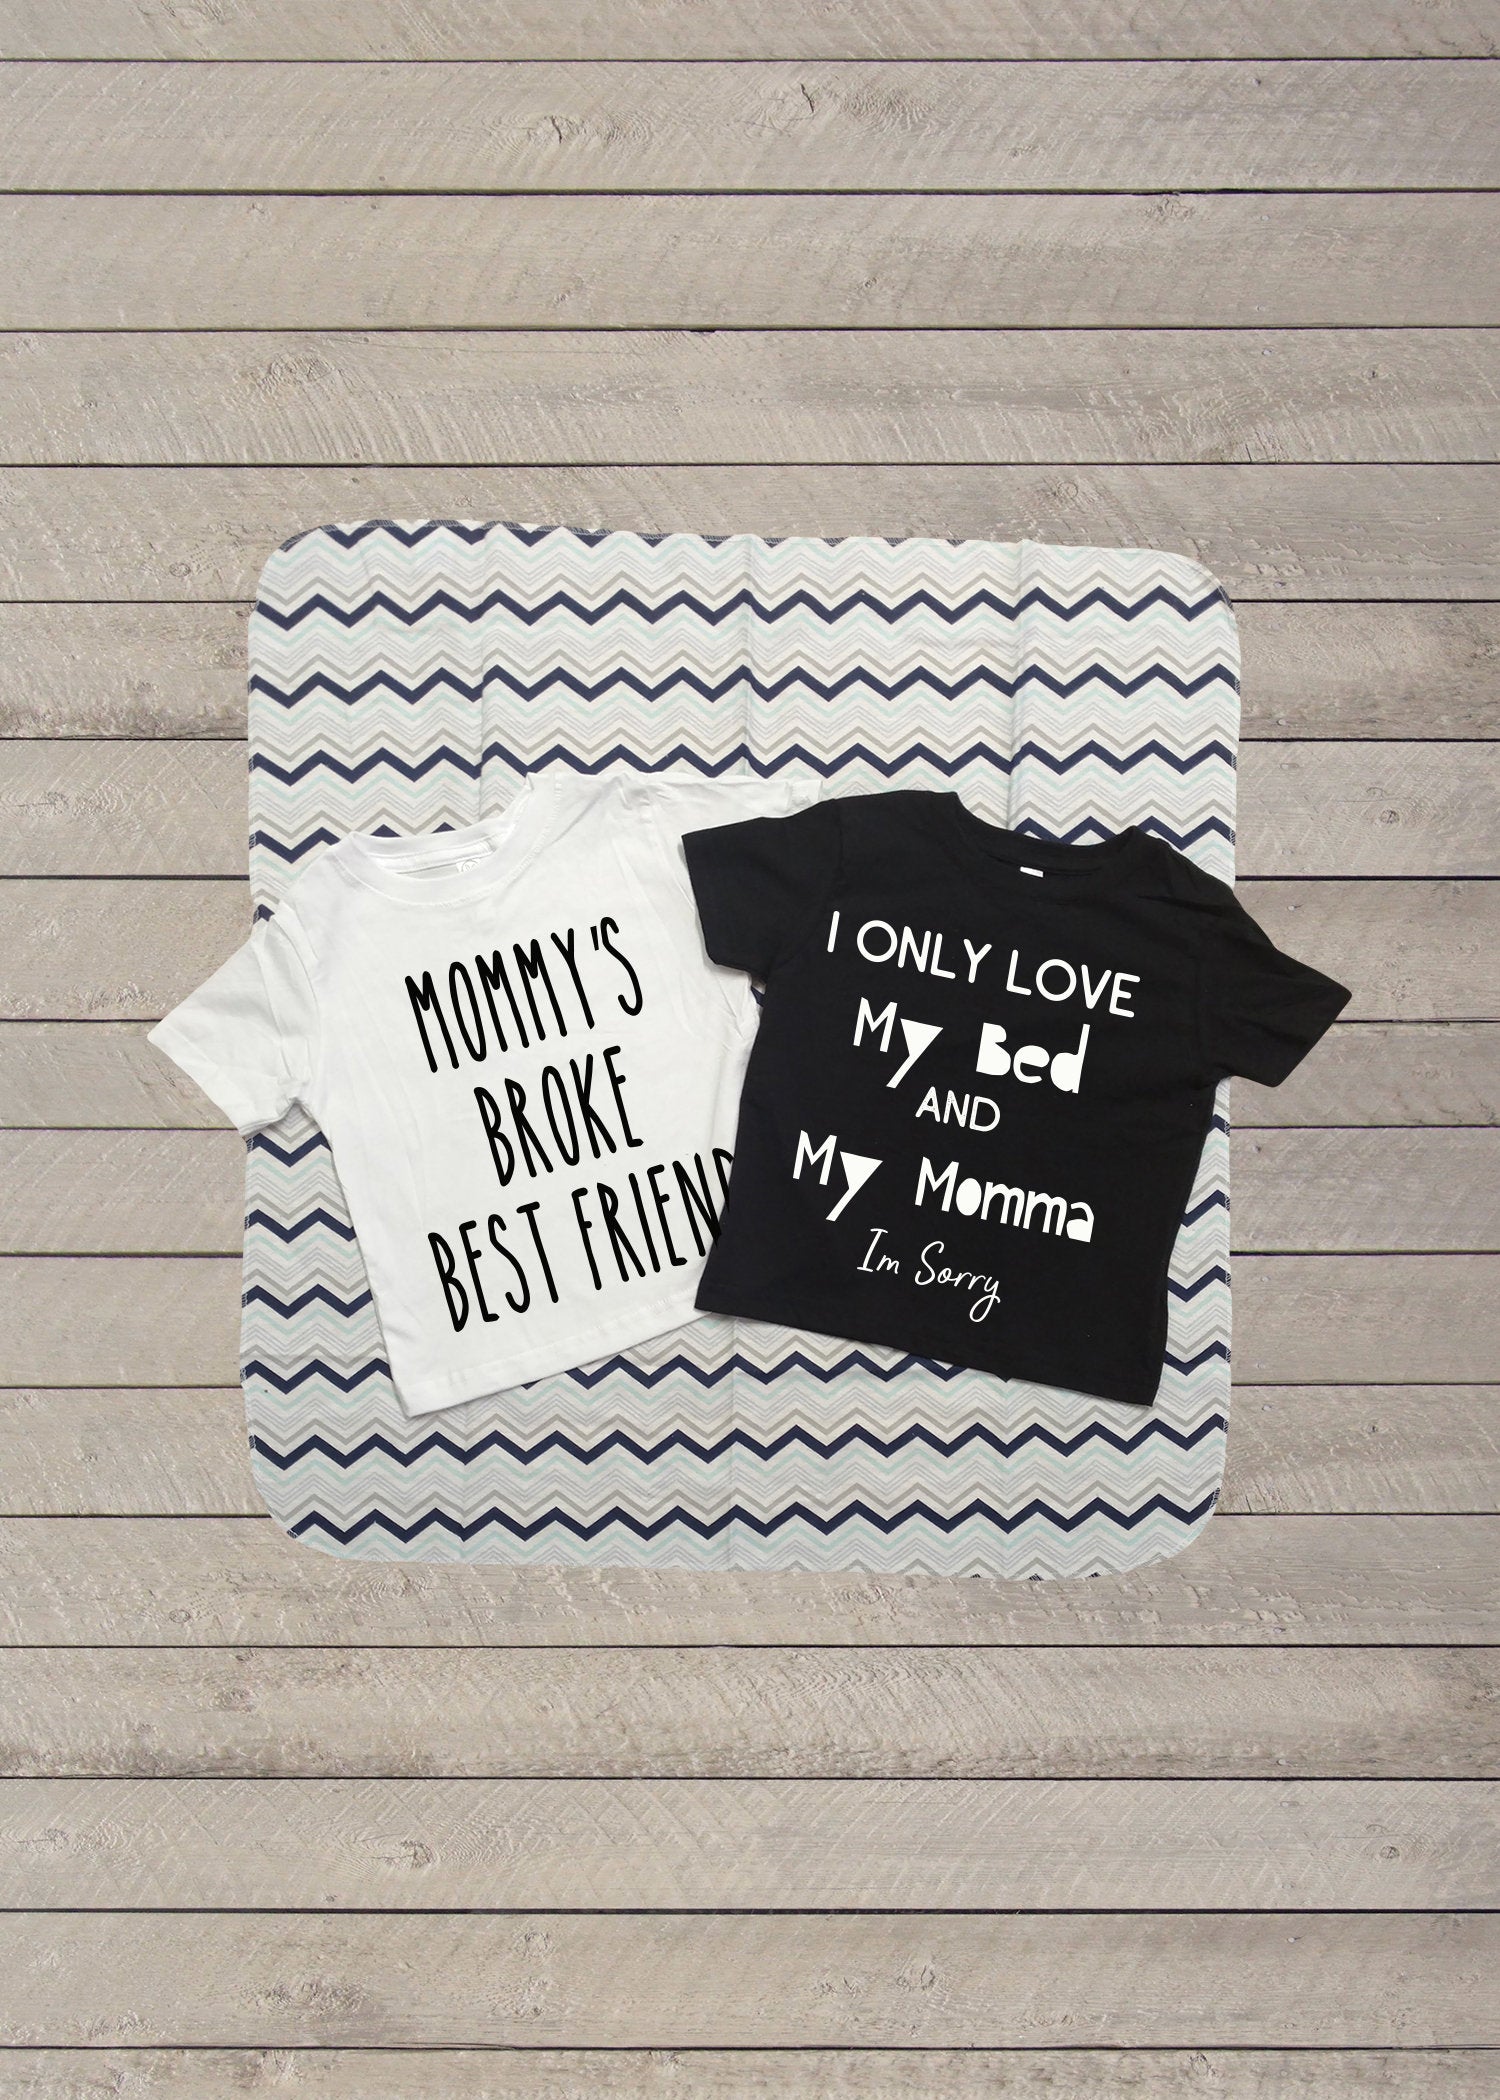 I Only Love My Bed and My Momma / Mommy's Broke Best Friend Toddler / Kidds Tshirt Tee